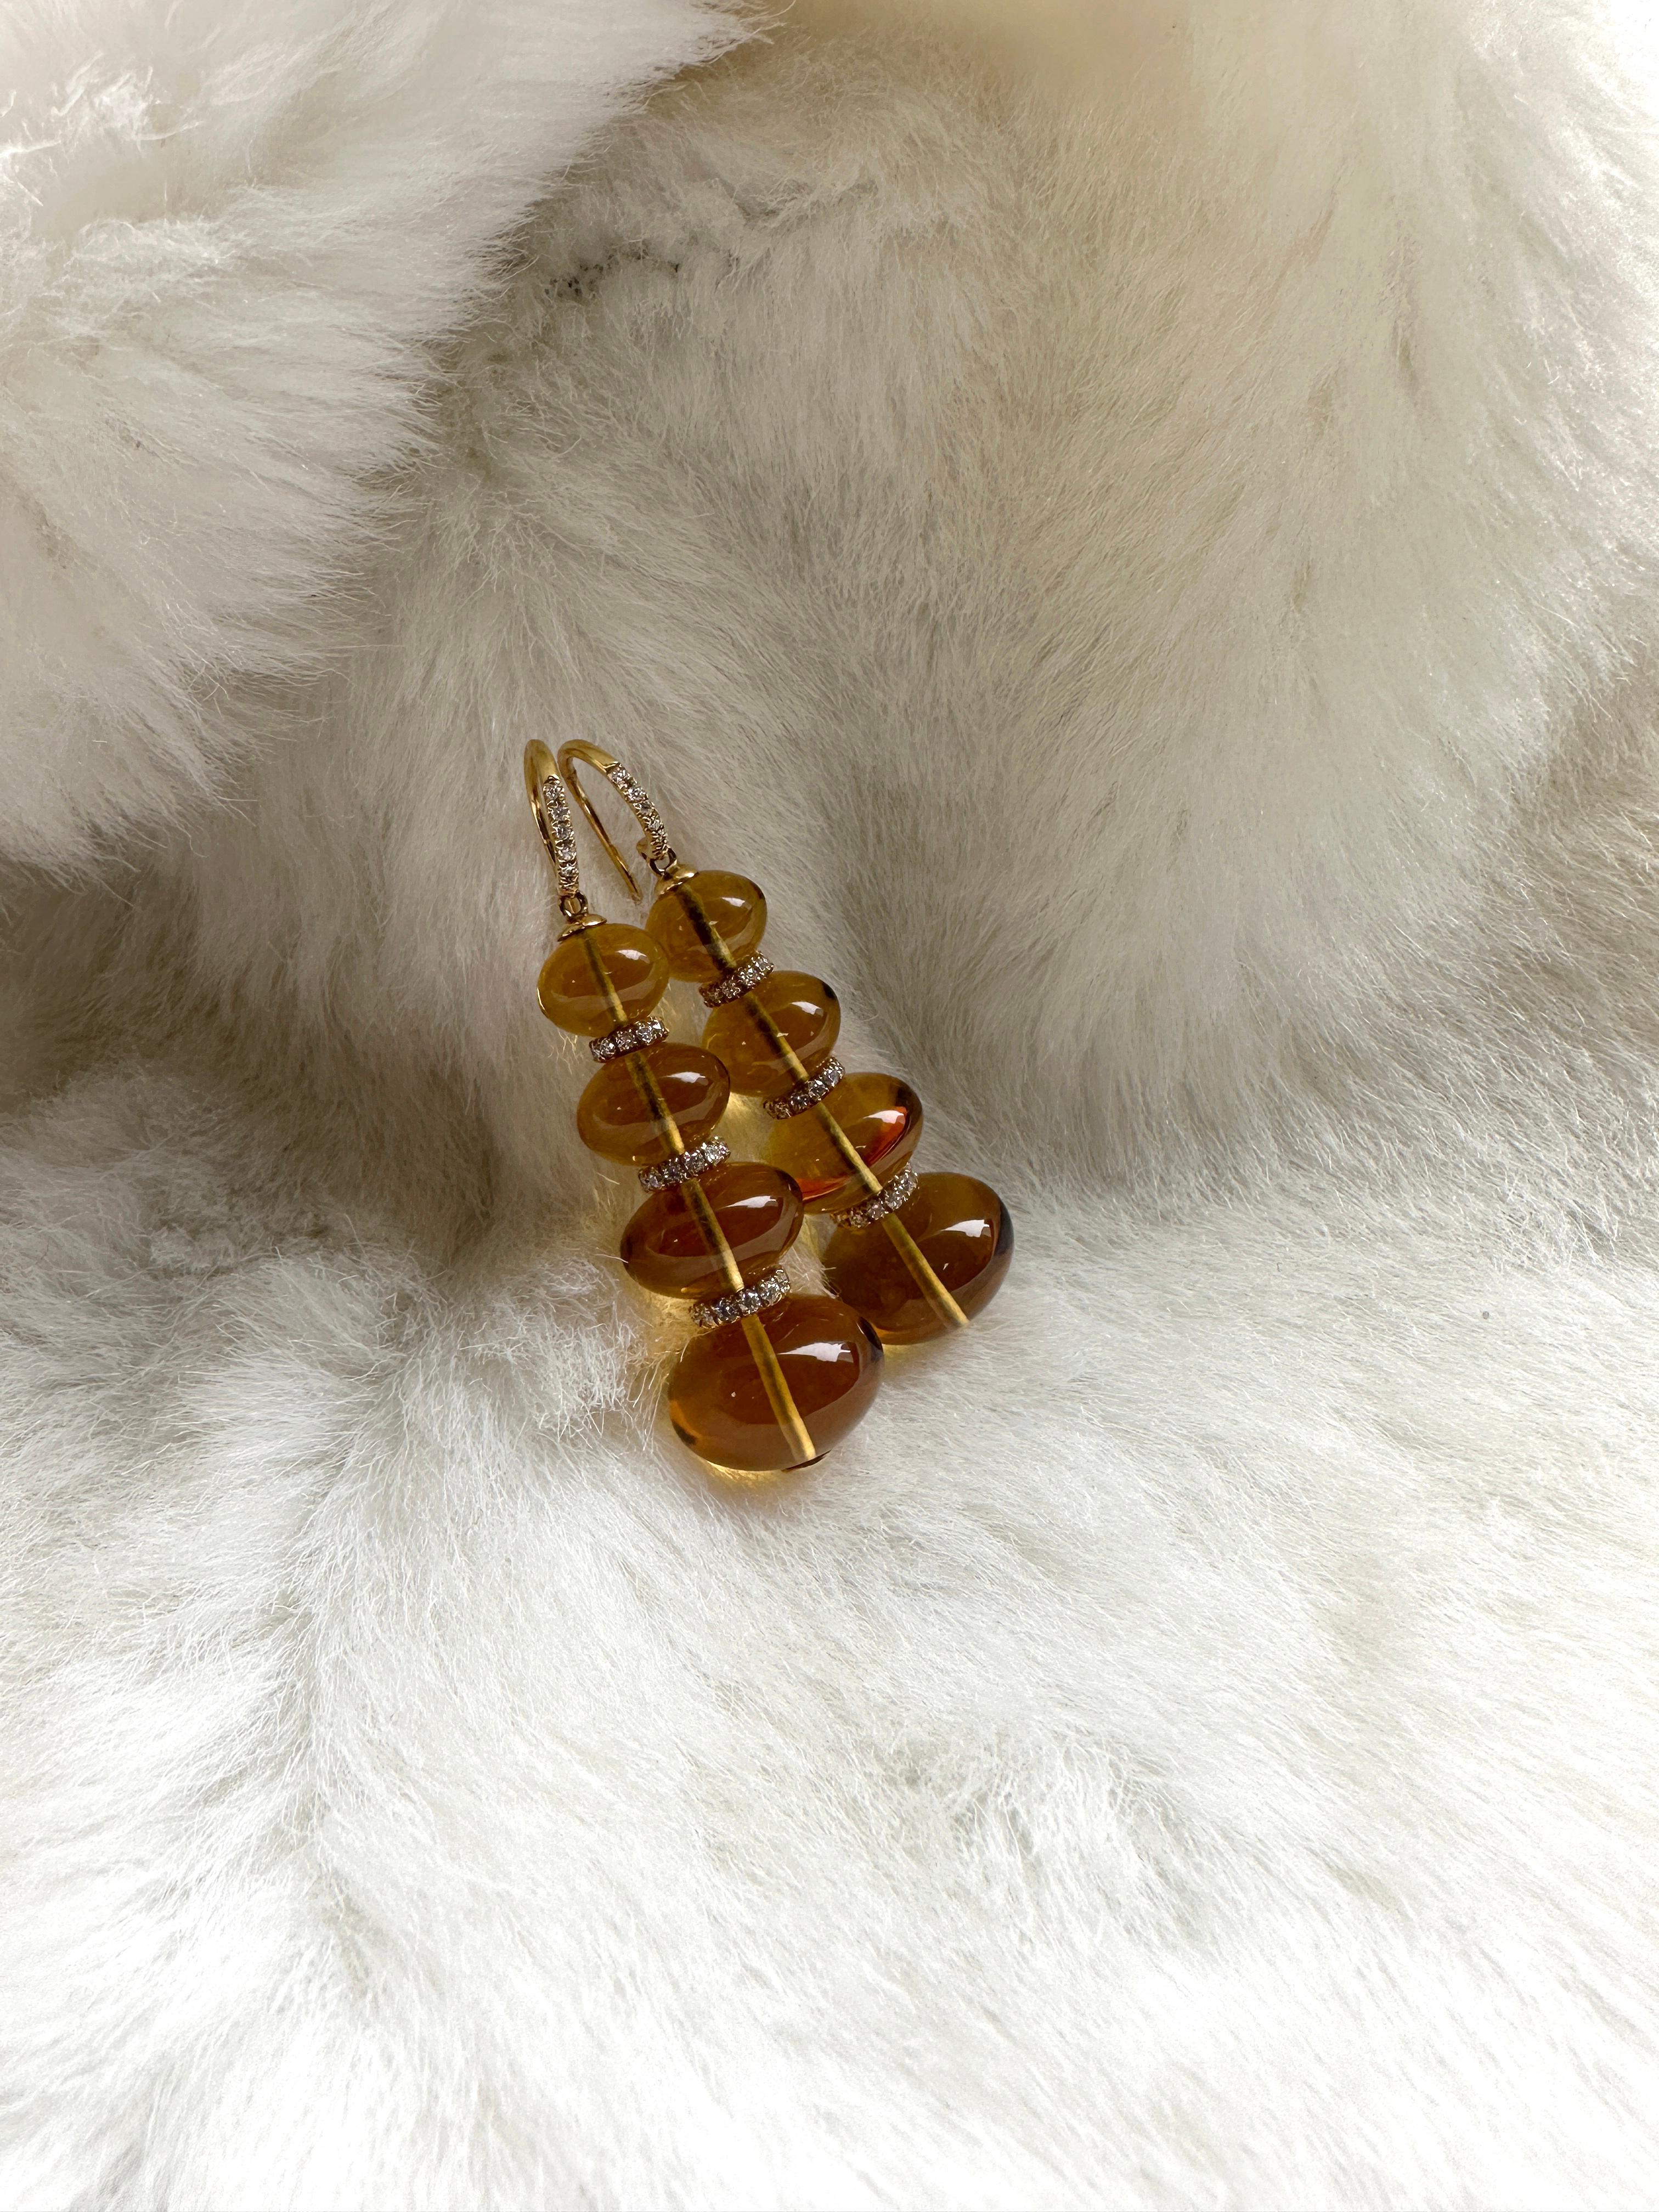 4 Tier Citrine Bead with Diamonds Earrings For Sale 2